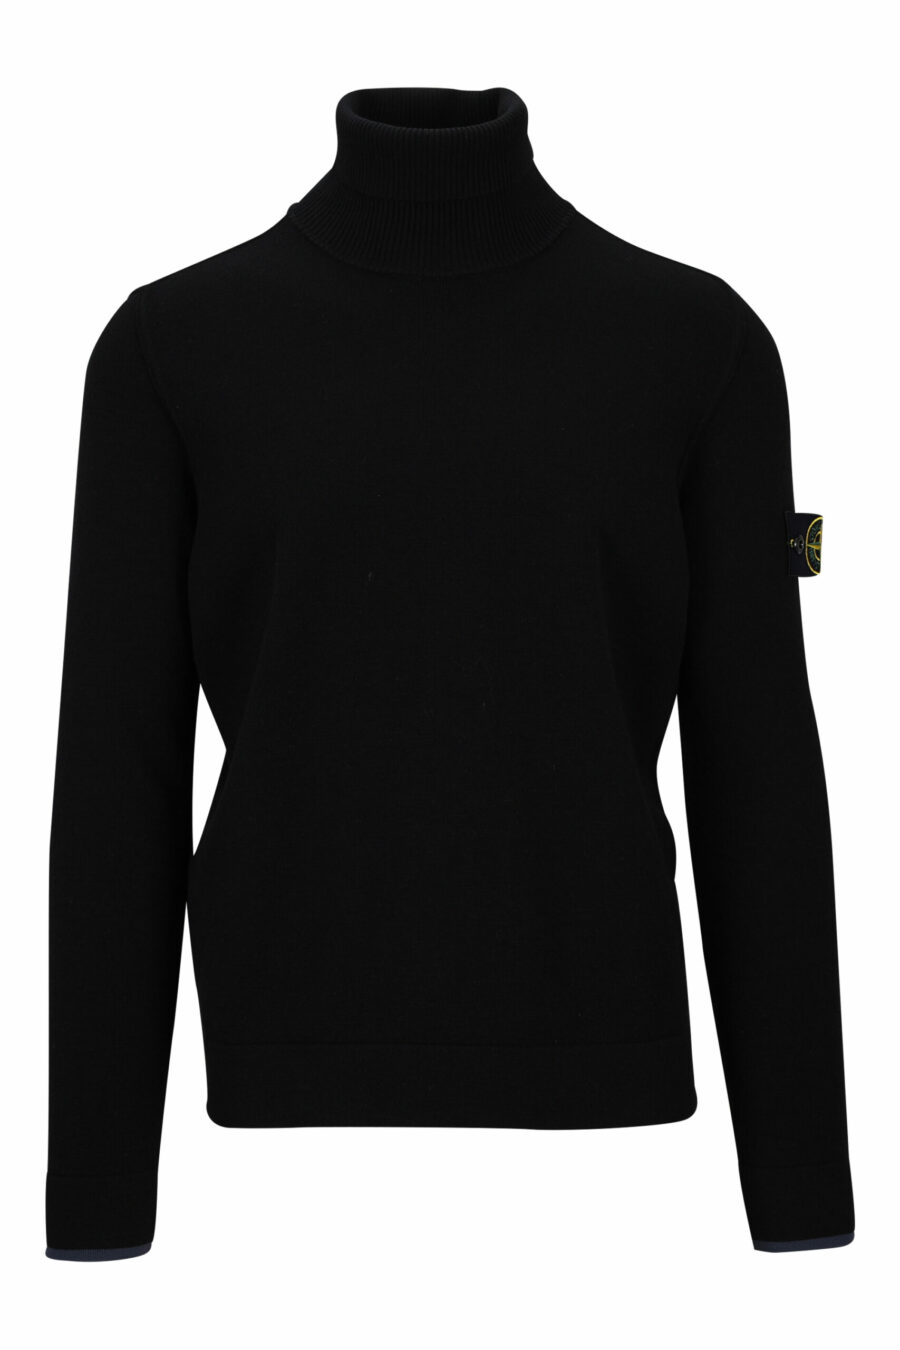 Black sweatshirt with high collar and side logo patch - 8052572741814 scaled